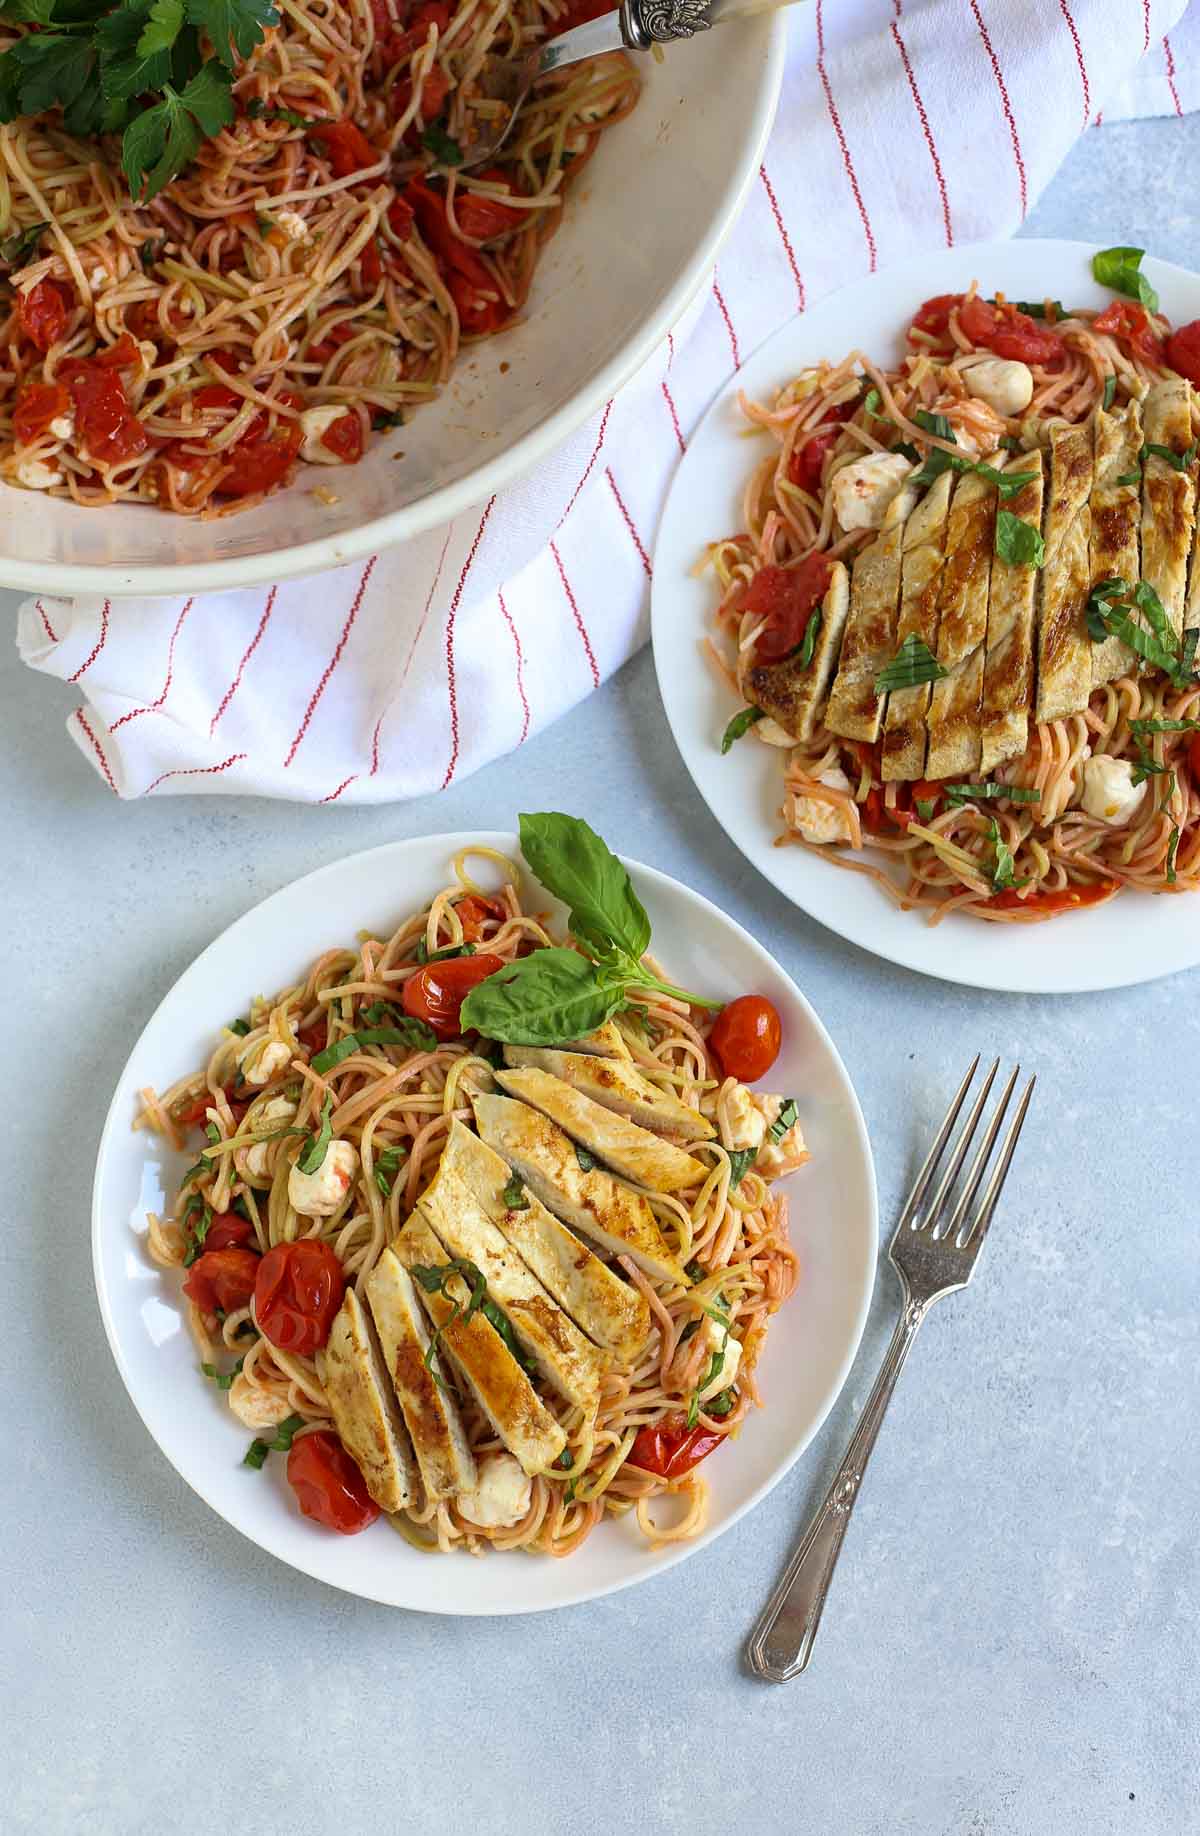 Margherita Pasta with Chicken | Take your favorite pizza and make a wonderful pasta dish! Simple, fresh, and delicious! Add chicken to take it up a notch...yum! | Pastashoppe.com